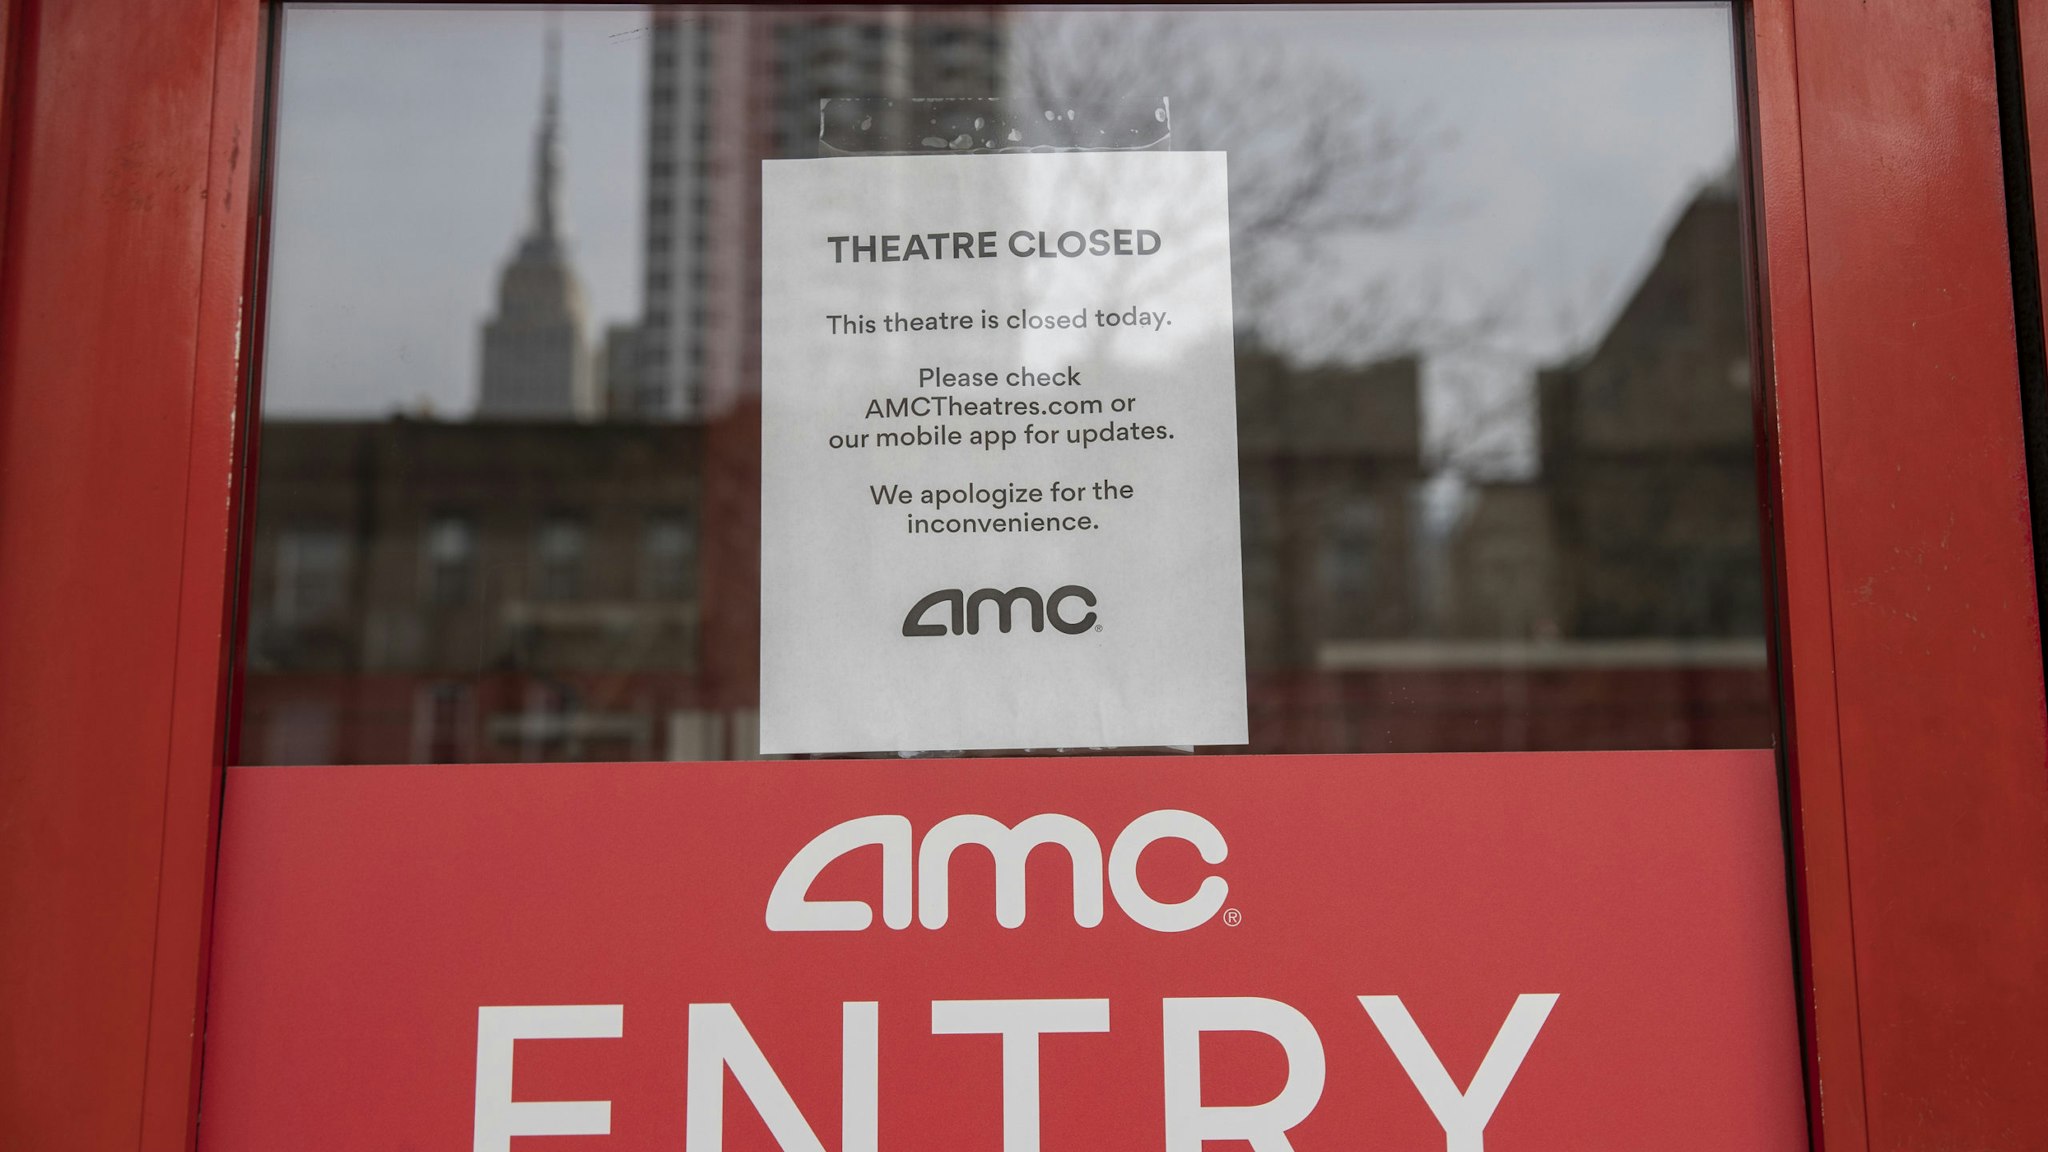 NEW YORK, NY - MARCH, 17: An AMC theater remains closed on March 17, 2020 in New York City. Schools, businesses and most places where people congregate across the country have been shut down as health officials try to slow the spread of COVID-19. (Photo by Victor J. Blue/Getty Images)